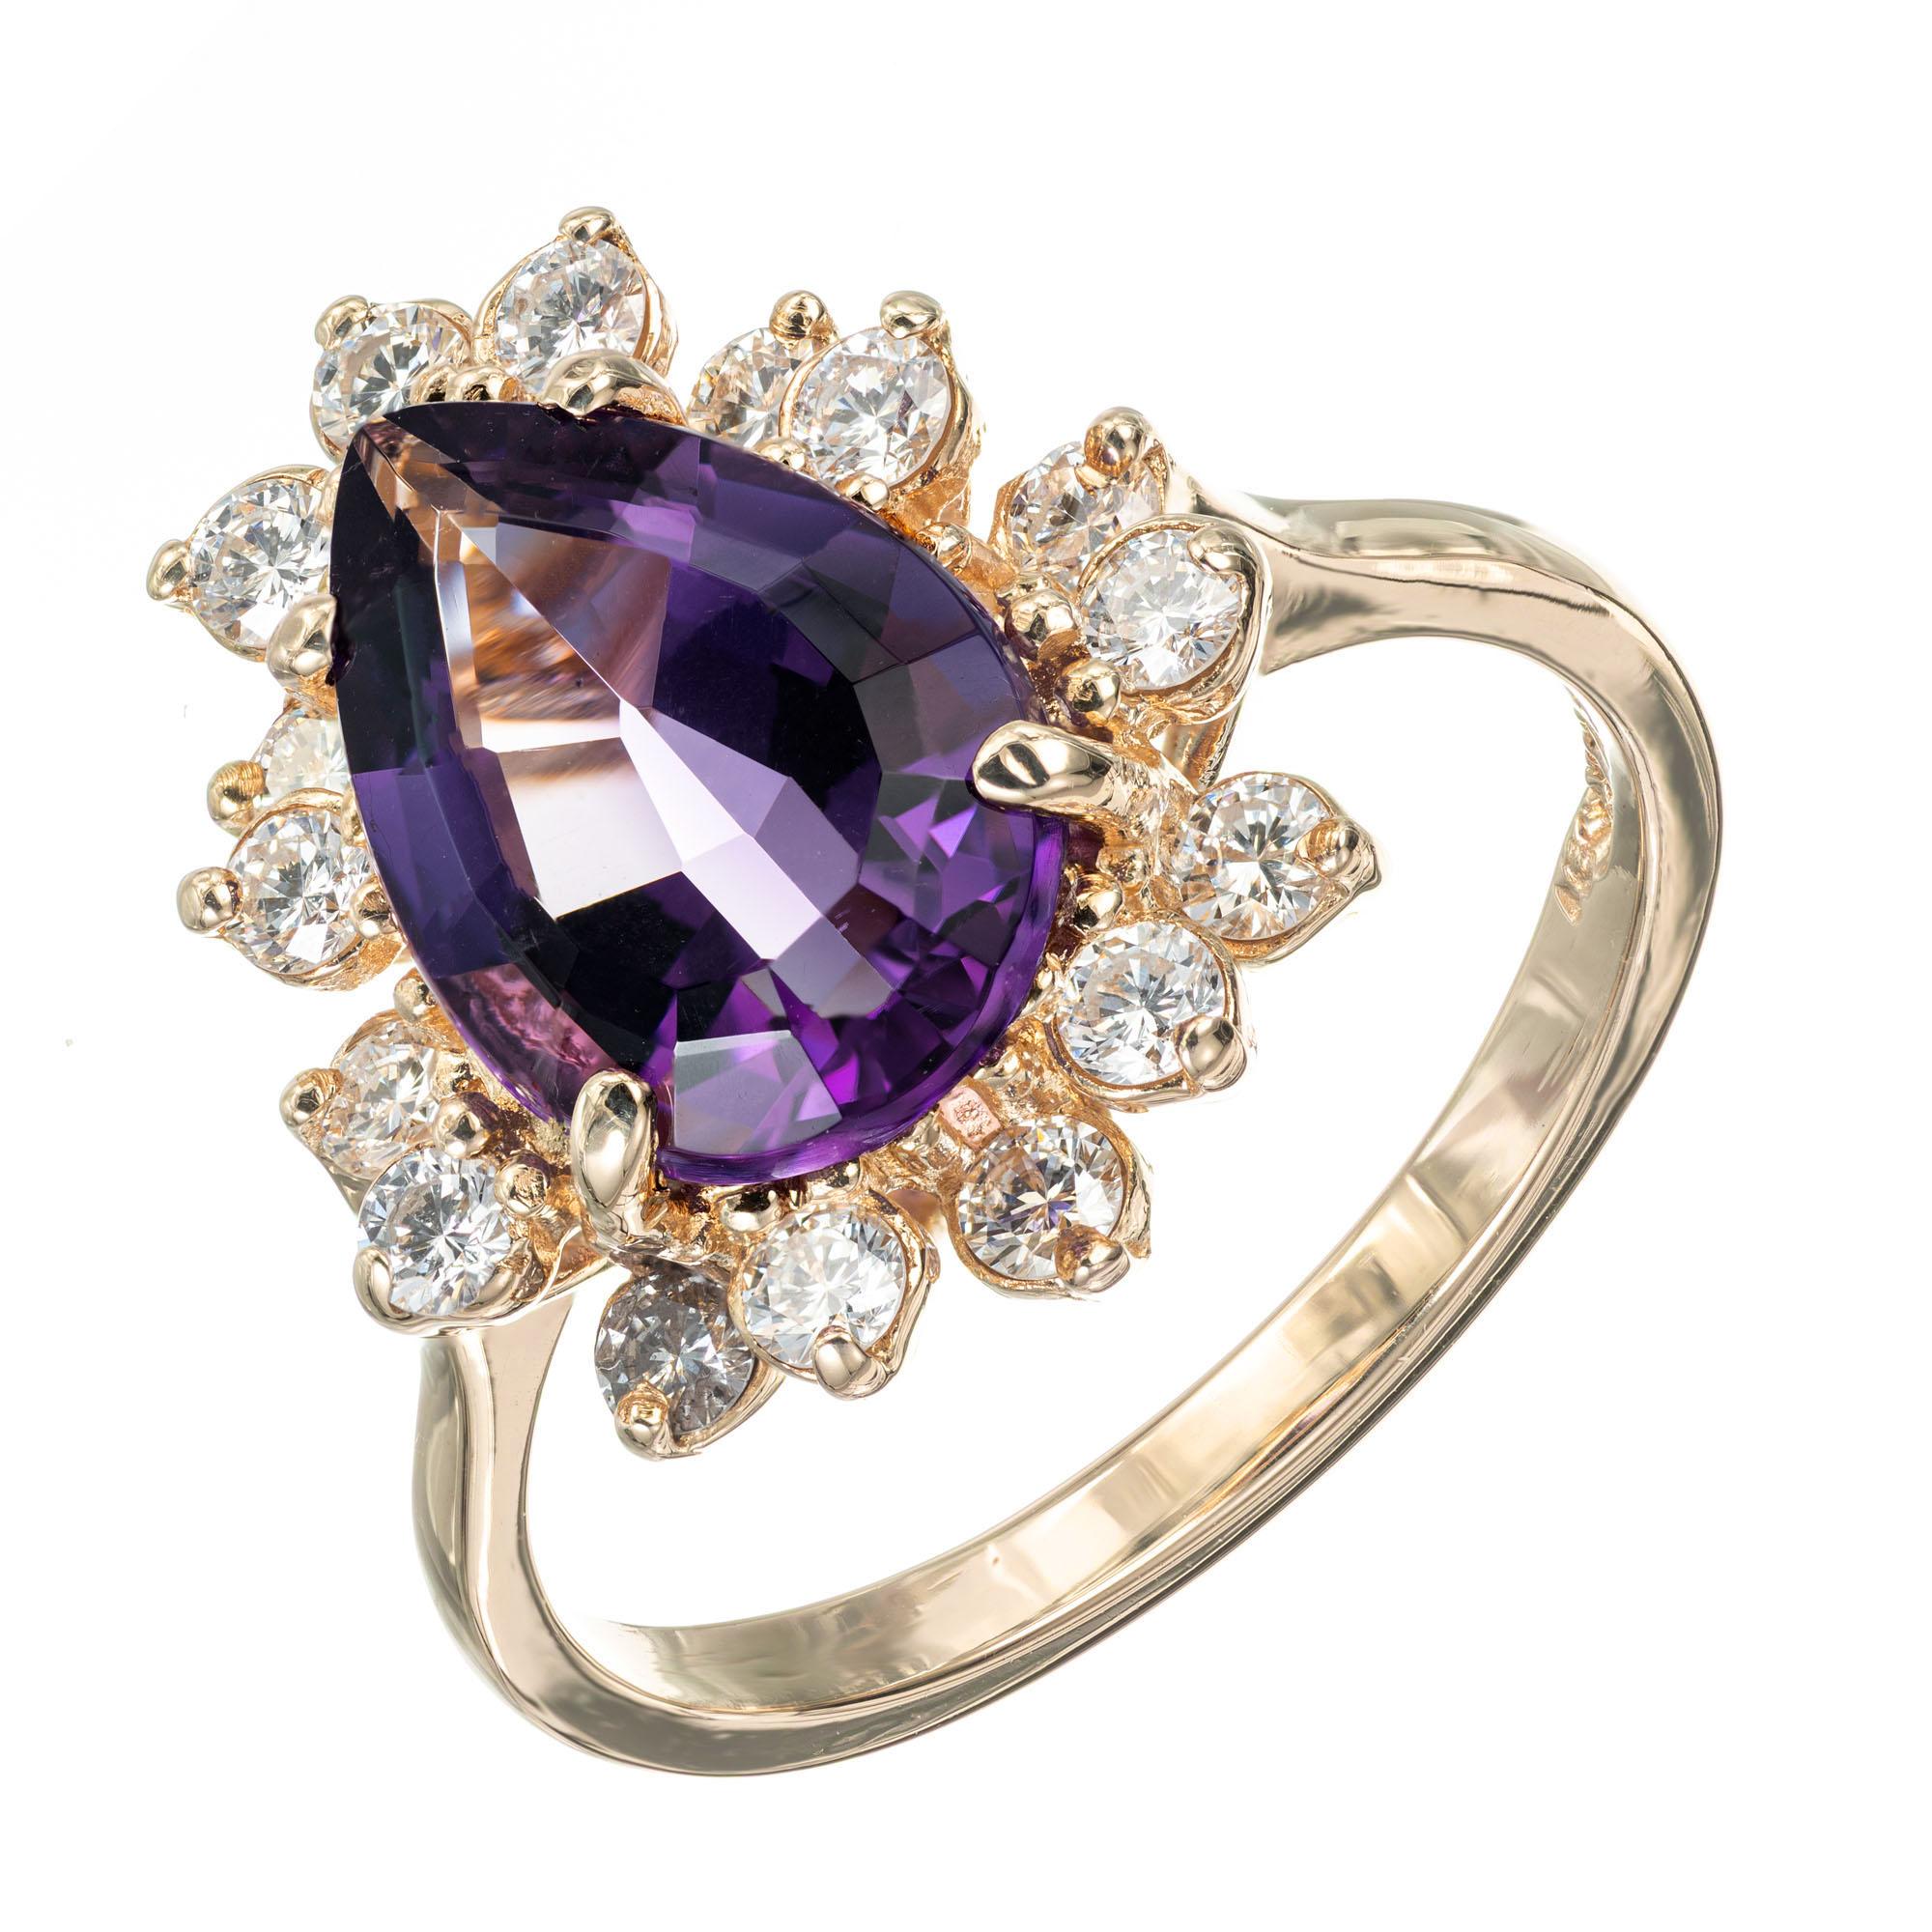 Amethyst and diamond ring. Pear shaped natural Amethyst with a halo of 16 full cut diamonds in a 14k yellow gold setting. 

1 Pear shaped natural gem purple Amethyst, approx. total weight 2.65cts, 12 x 8mm
16 full cut diamonds, approx. total weight